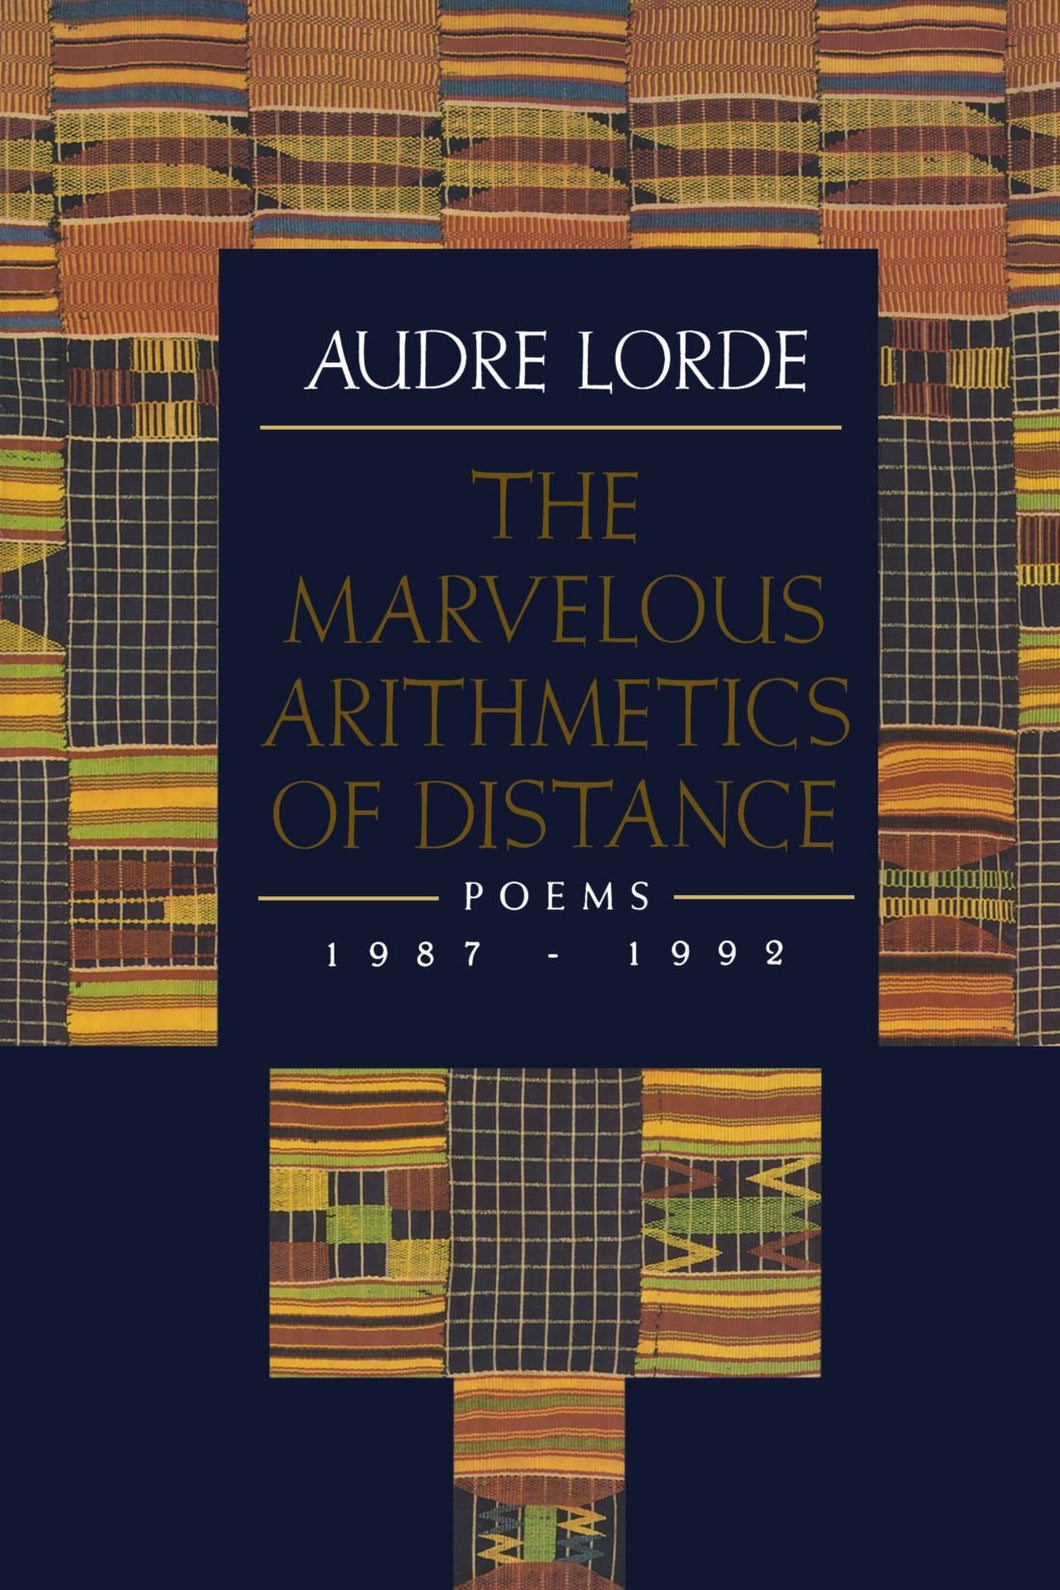 The Marvelous Arithmetics of Distance by Audre Lorde